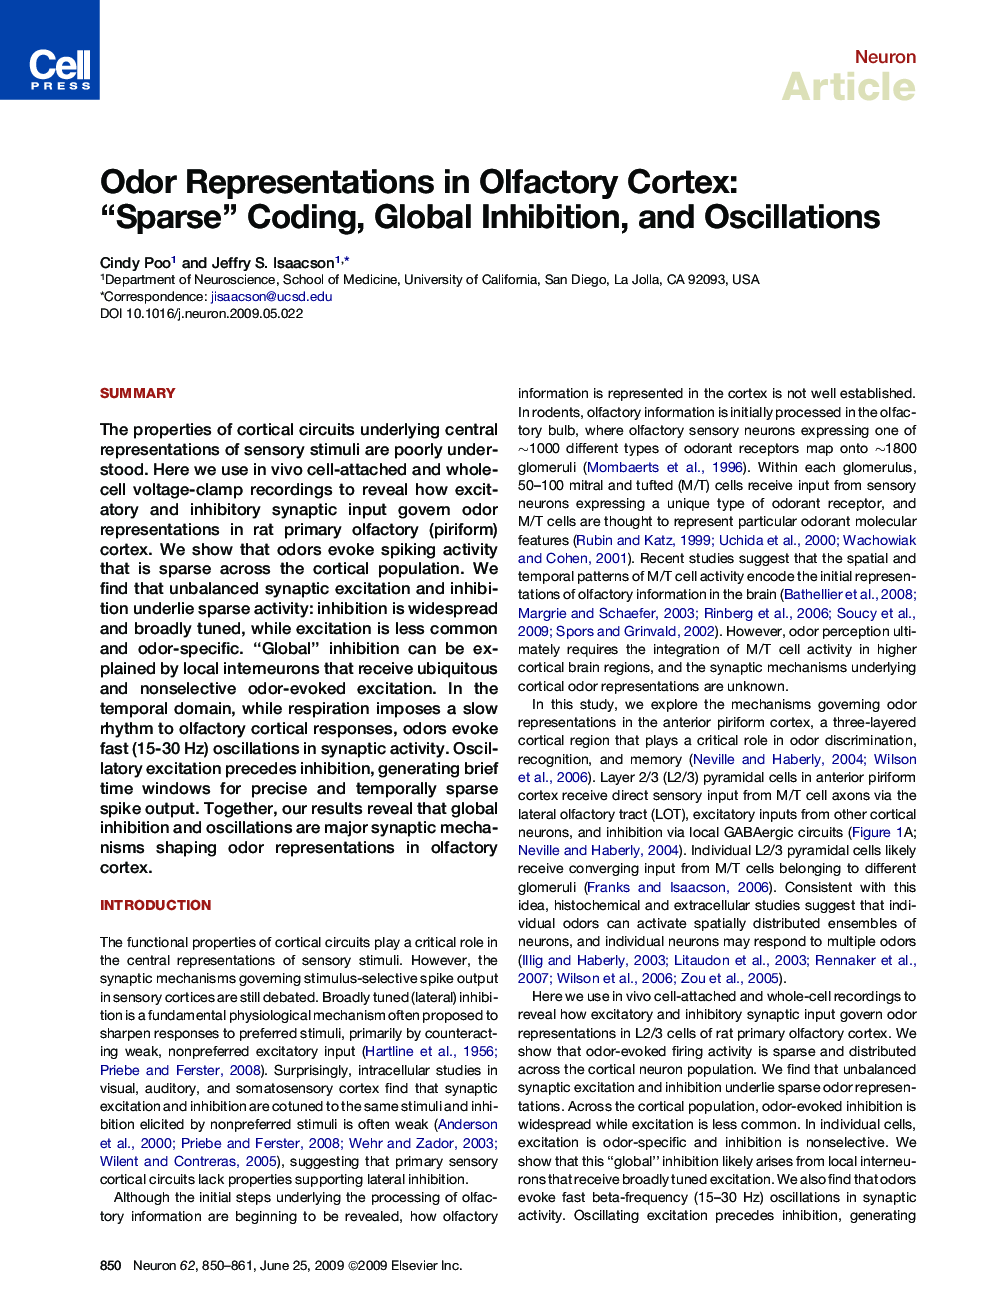 Odor Representations in Olfactory Cortex: “Sparse” Coding, Global Inhibition, and Oscillations